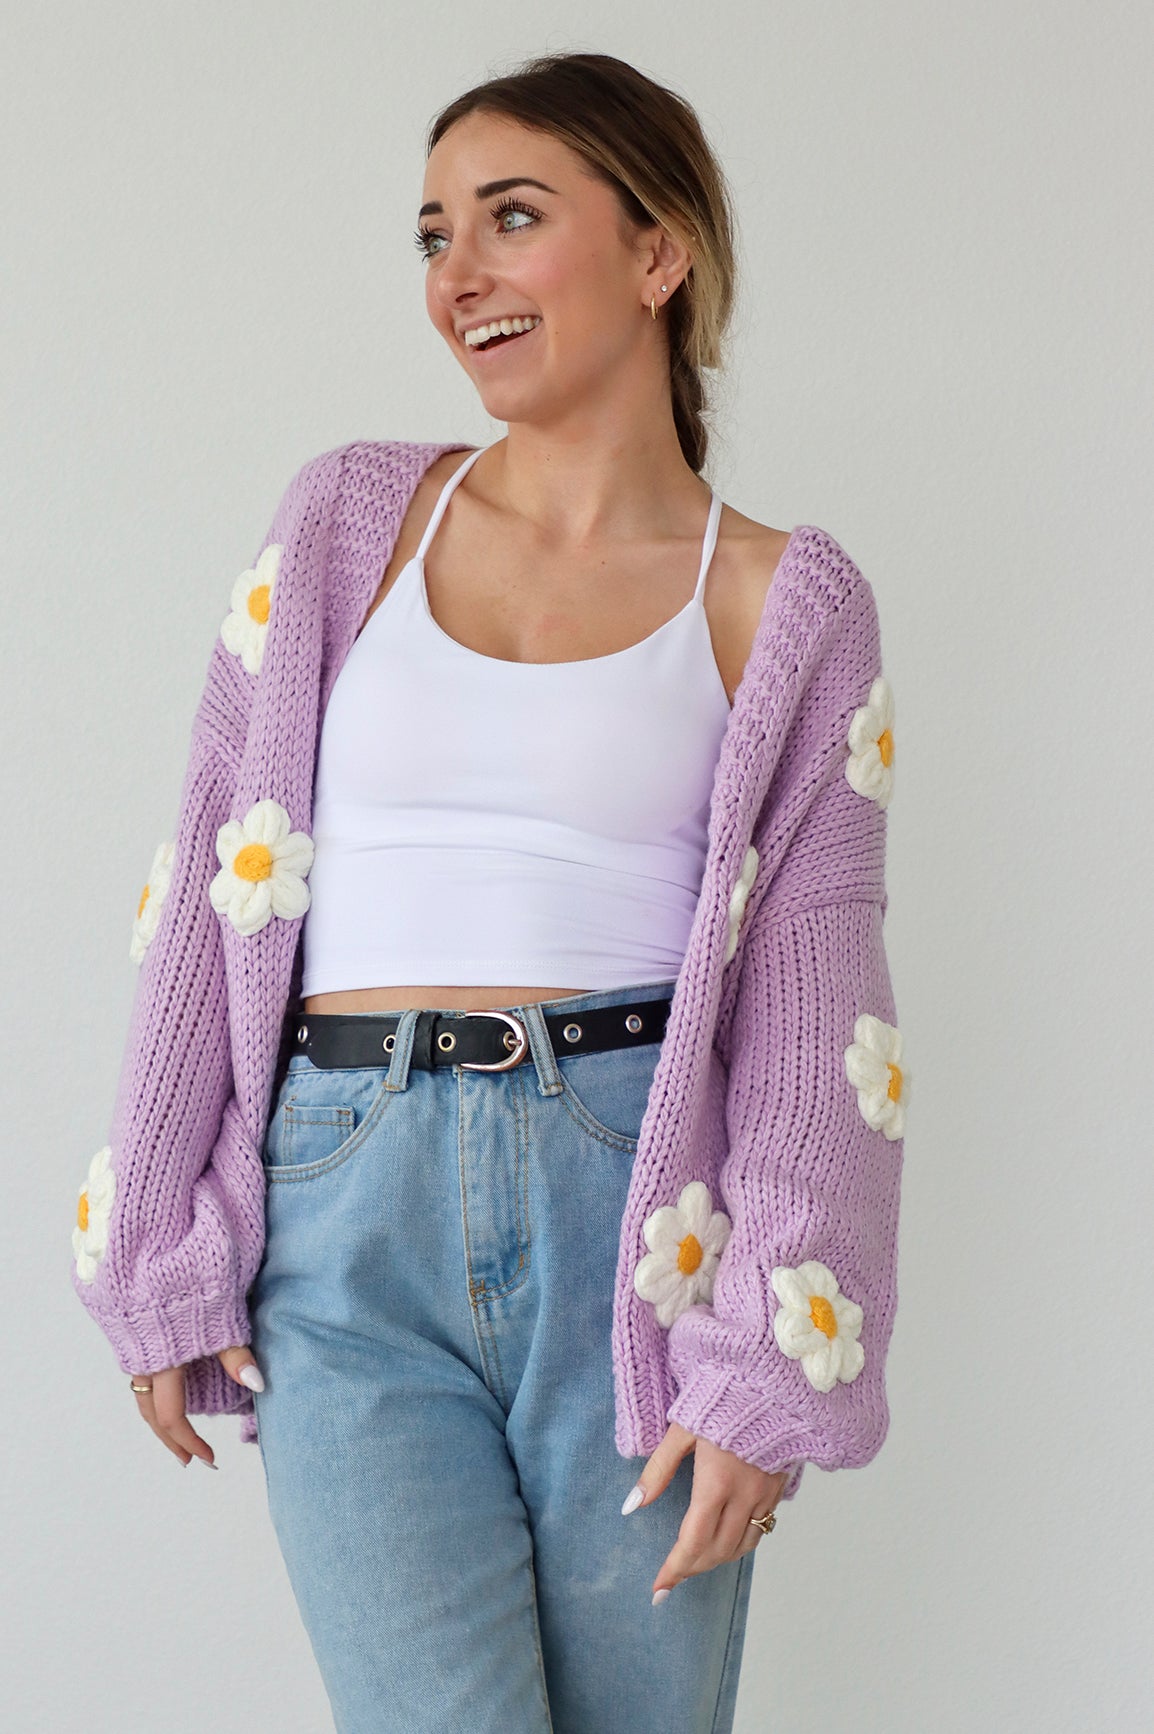 girl wearing a purple knit cardigan with daisies